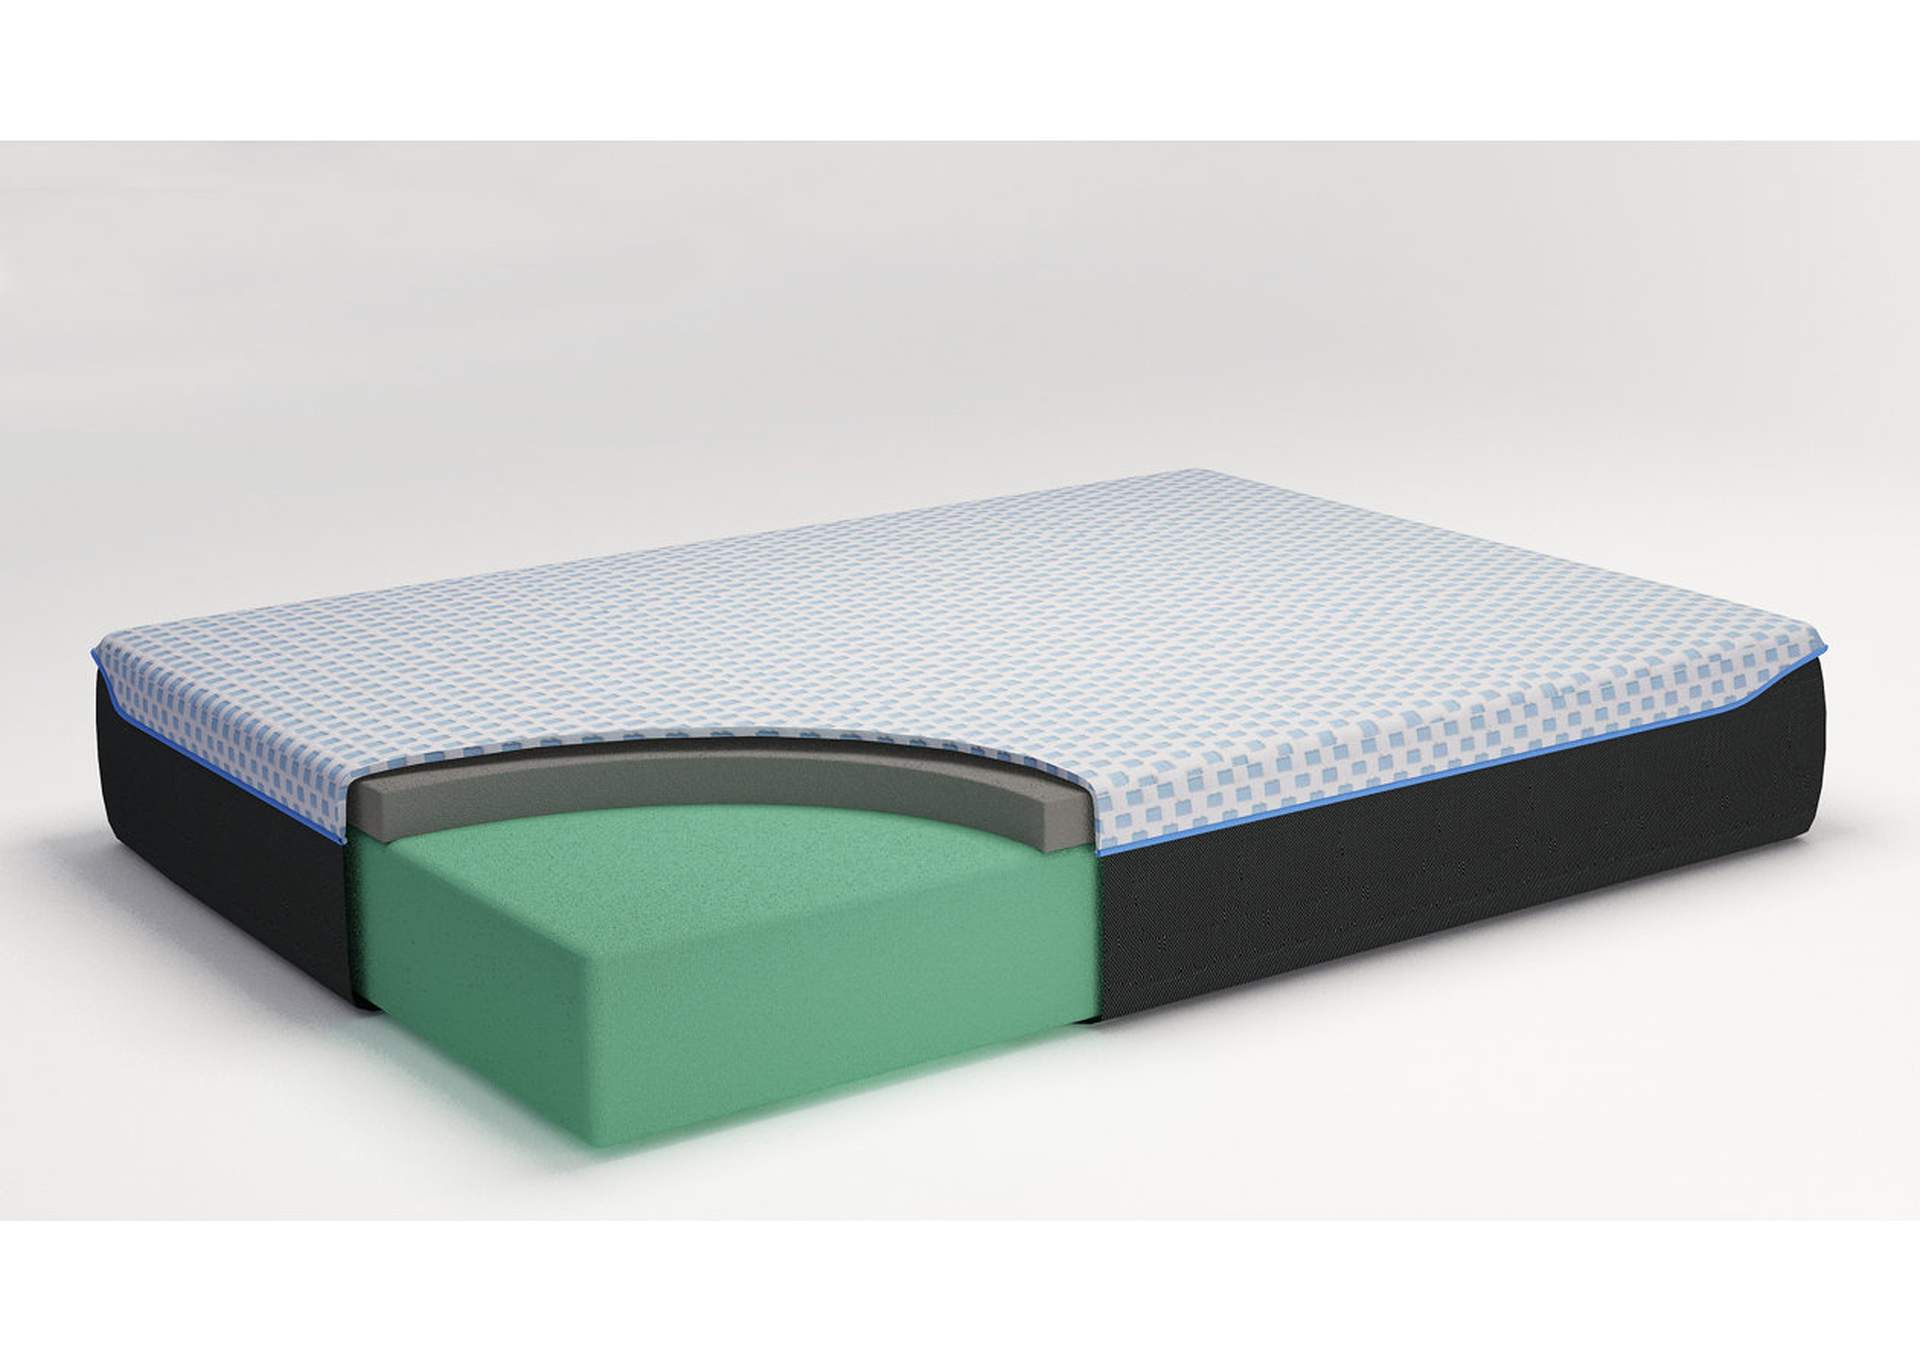 12 Inch Chime Elite King Memory Foam Mattress in a box,Direct To Consumer Express